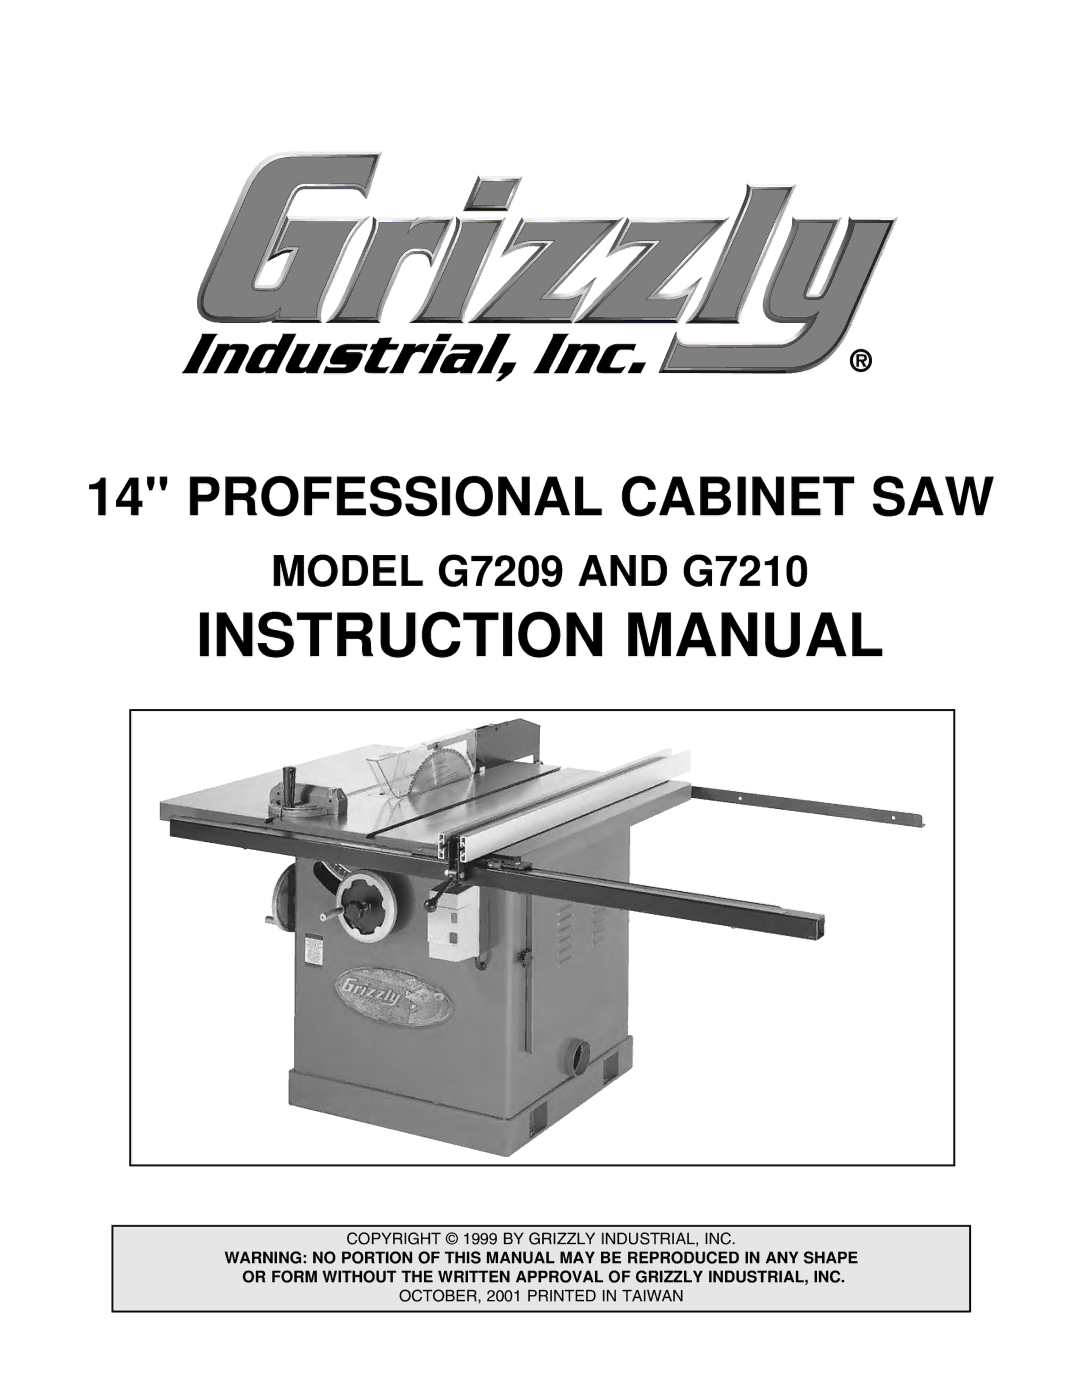 Grizzly instruction manual Professional Cabinet SAW, Model G7209 and G7210 